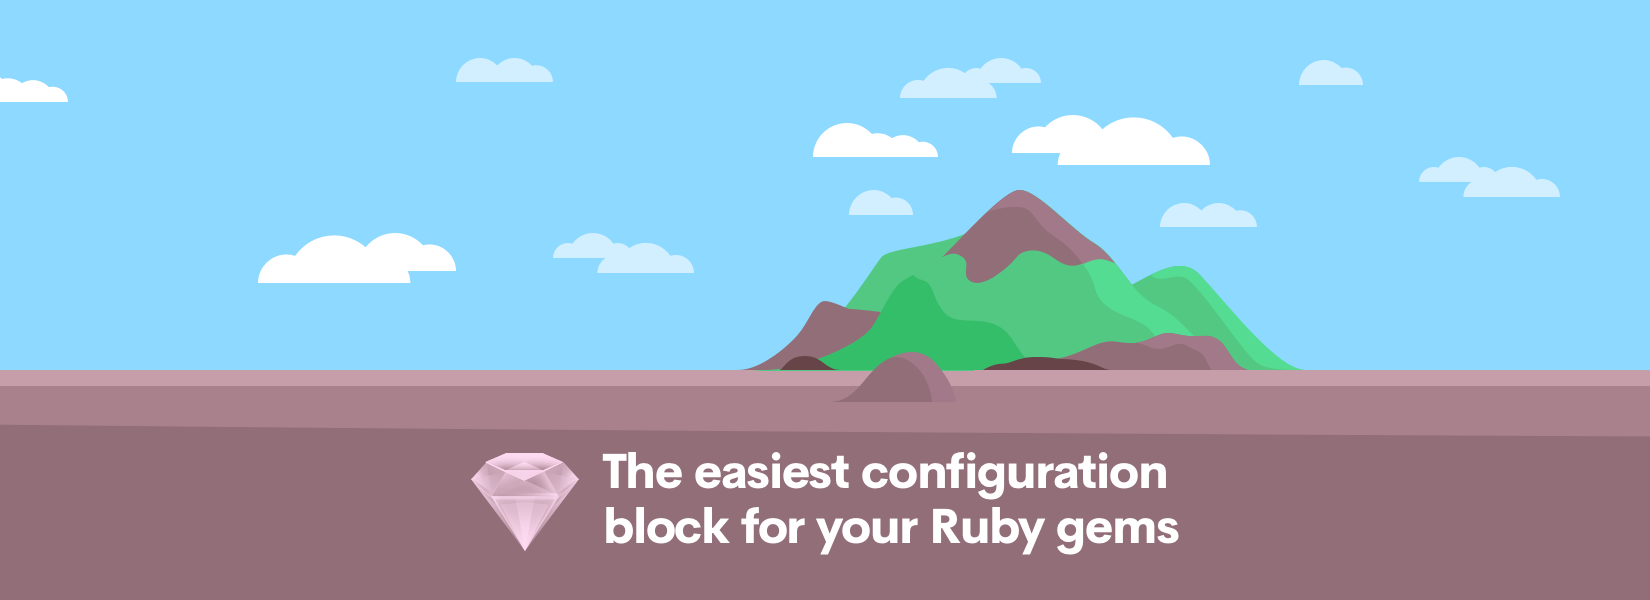 The easiest configuration block for your Ruby gems